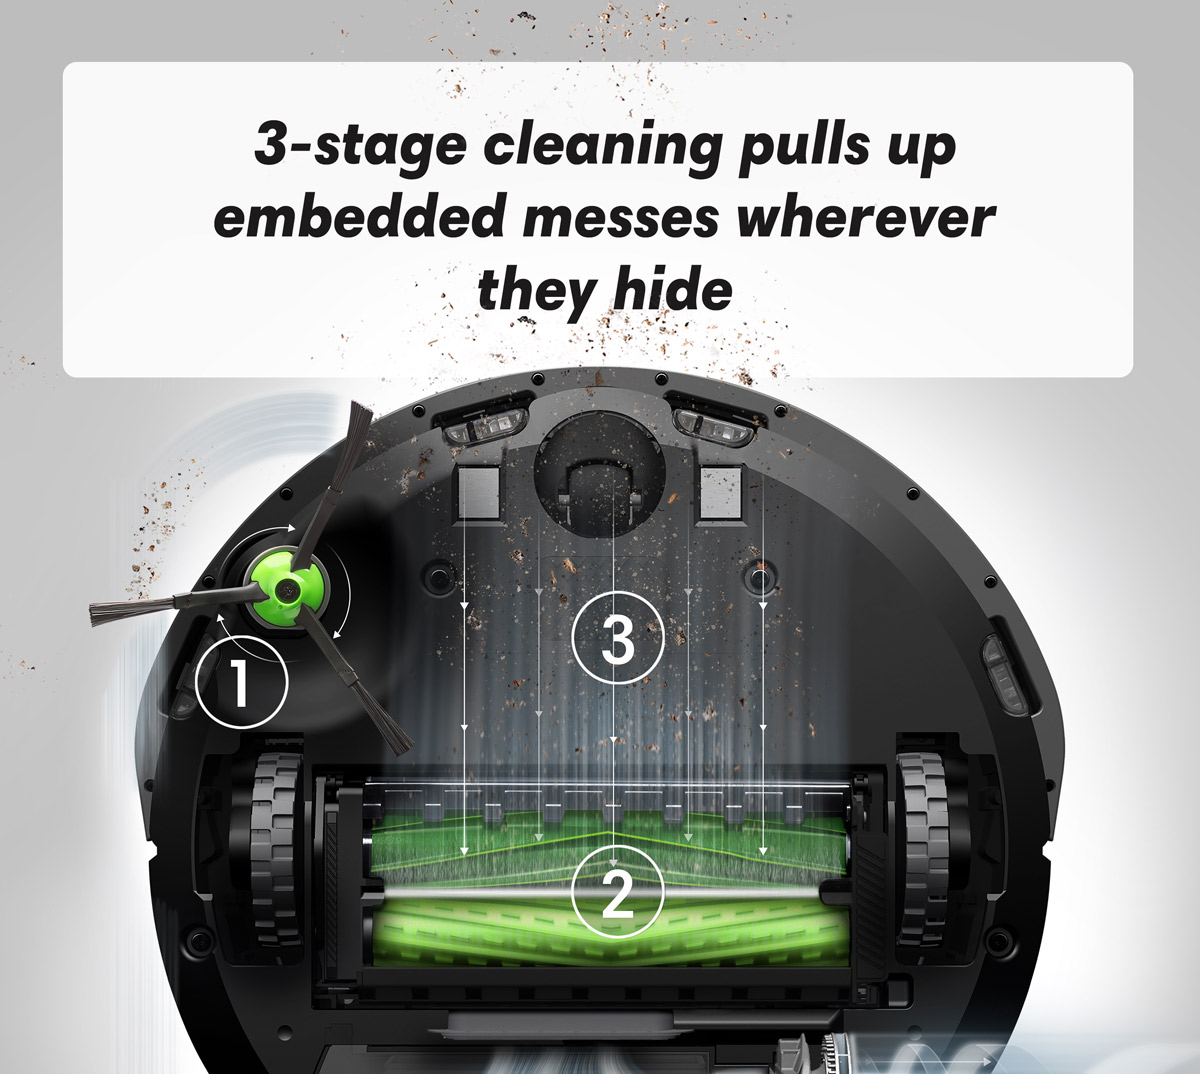 iRobot Roomba e5 review: An electronic puppy that cleans